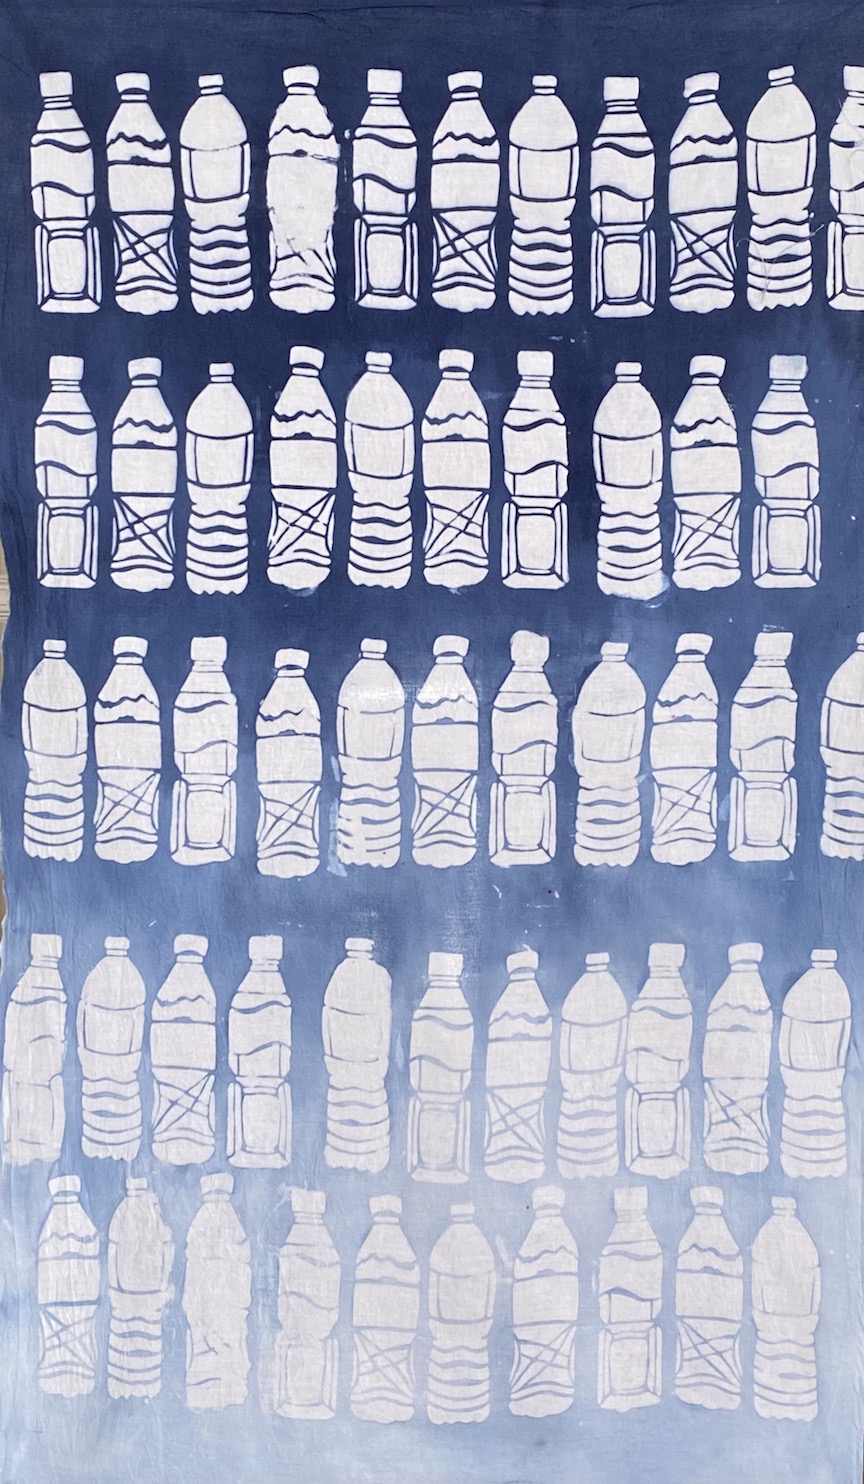 Dark blue to white gradient on fabric, with rows of plastic bottles imprinted as negative space on the gradient background